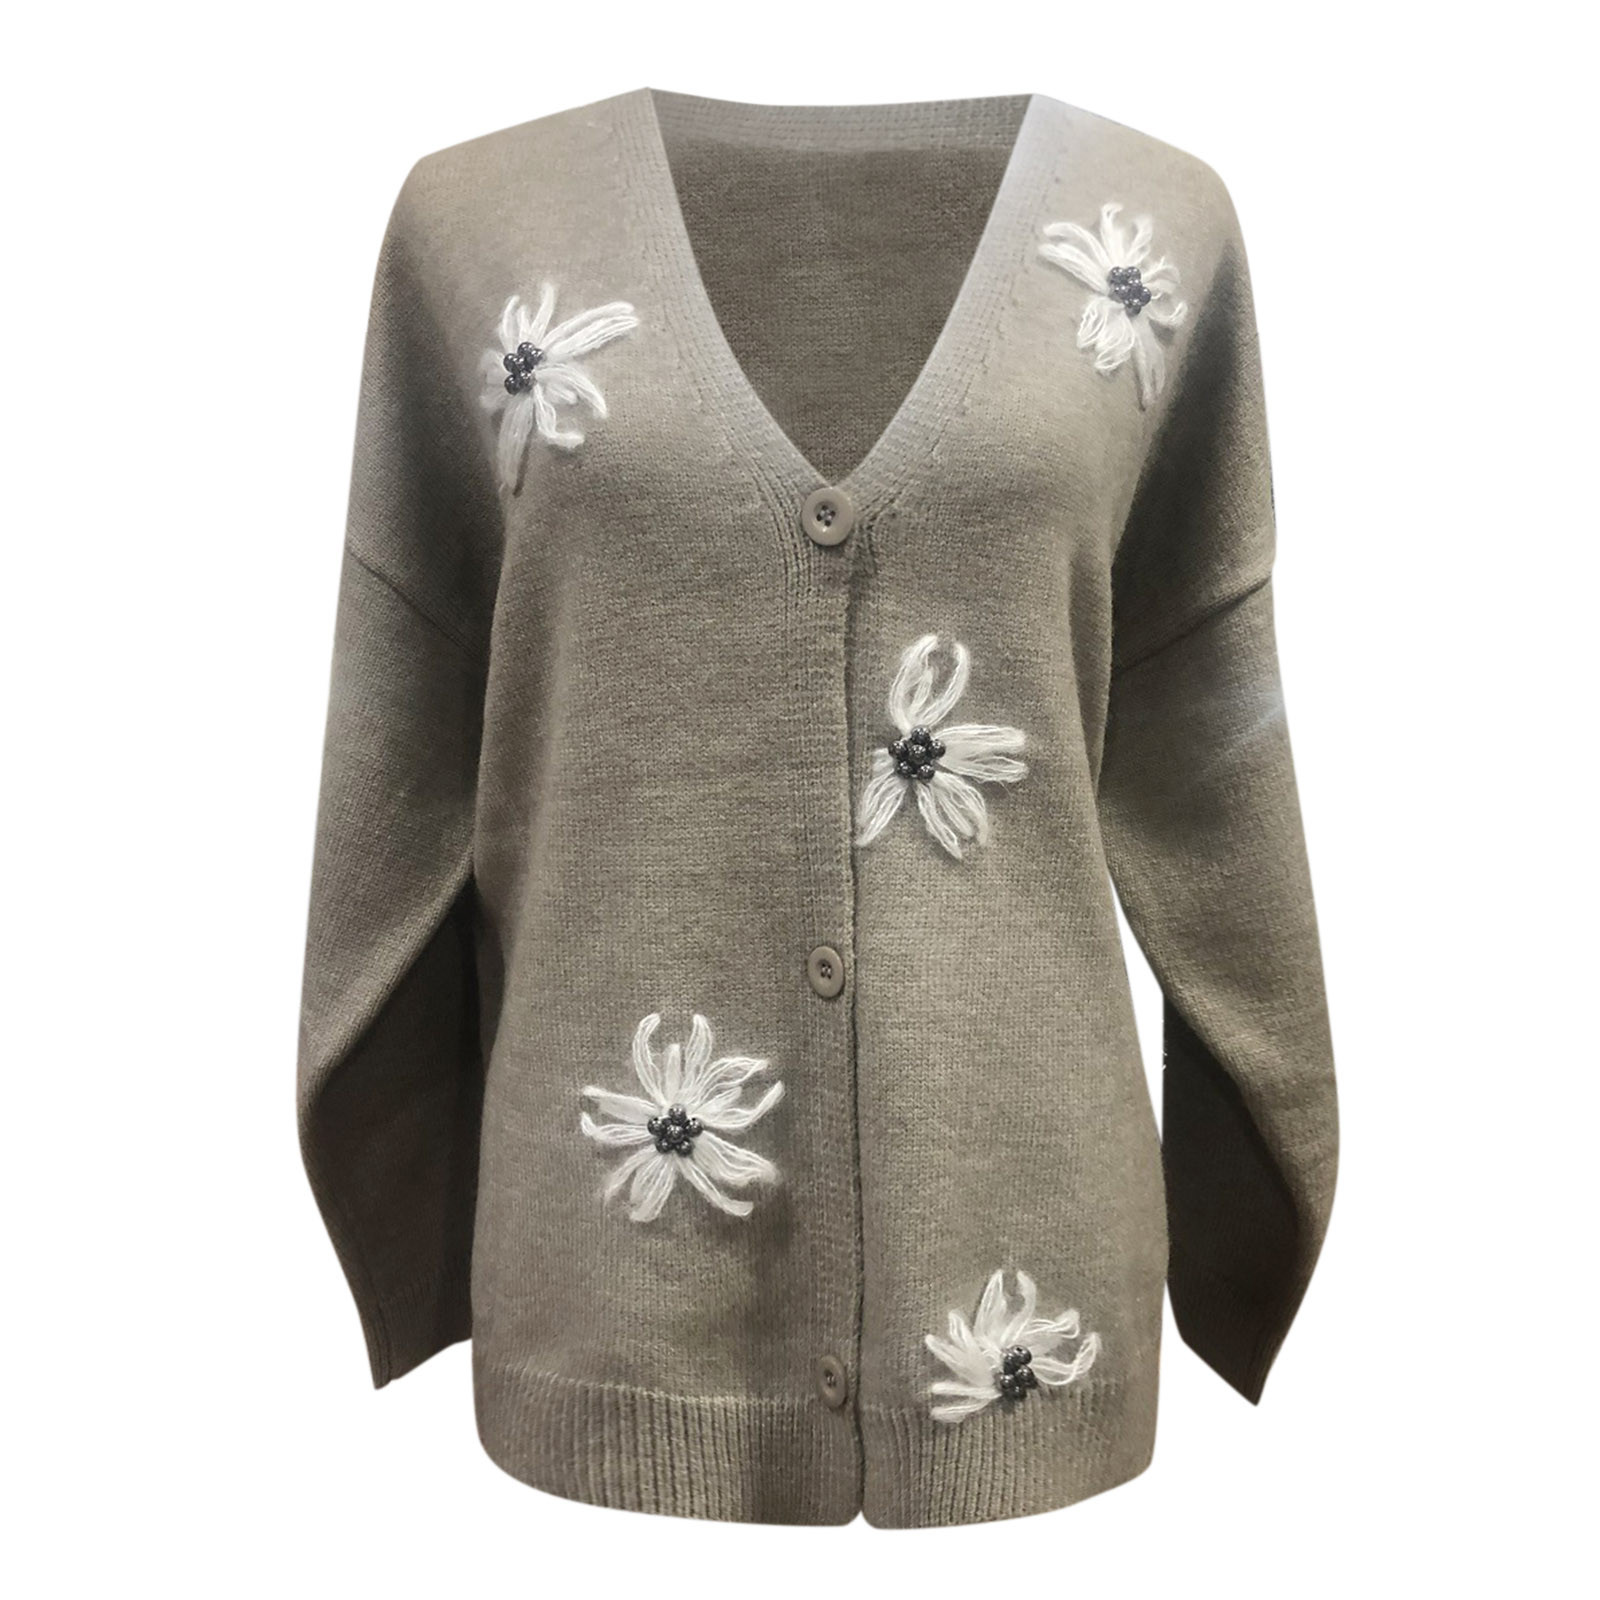 Women's Floral Embroidered Knit Cardigan Sweater Slim V-neck Long ...